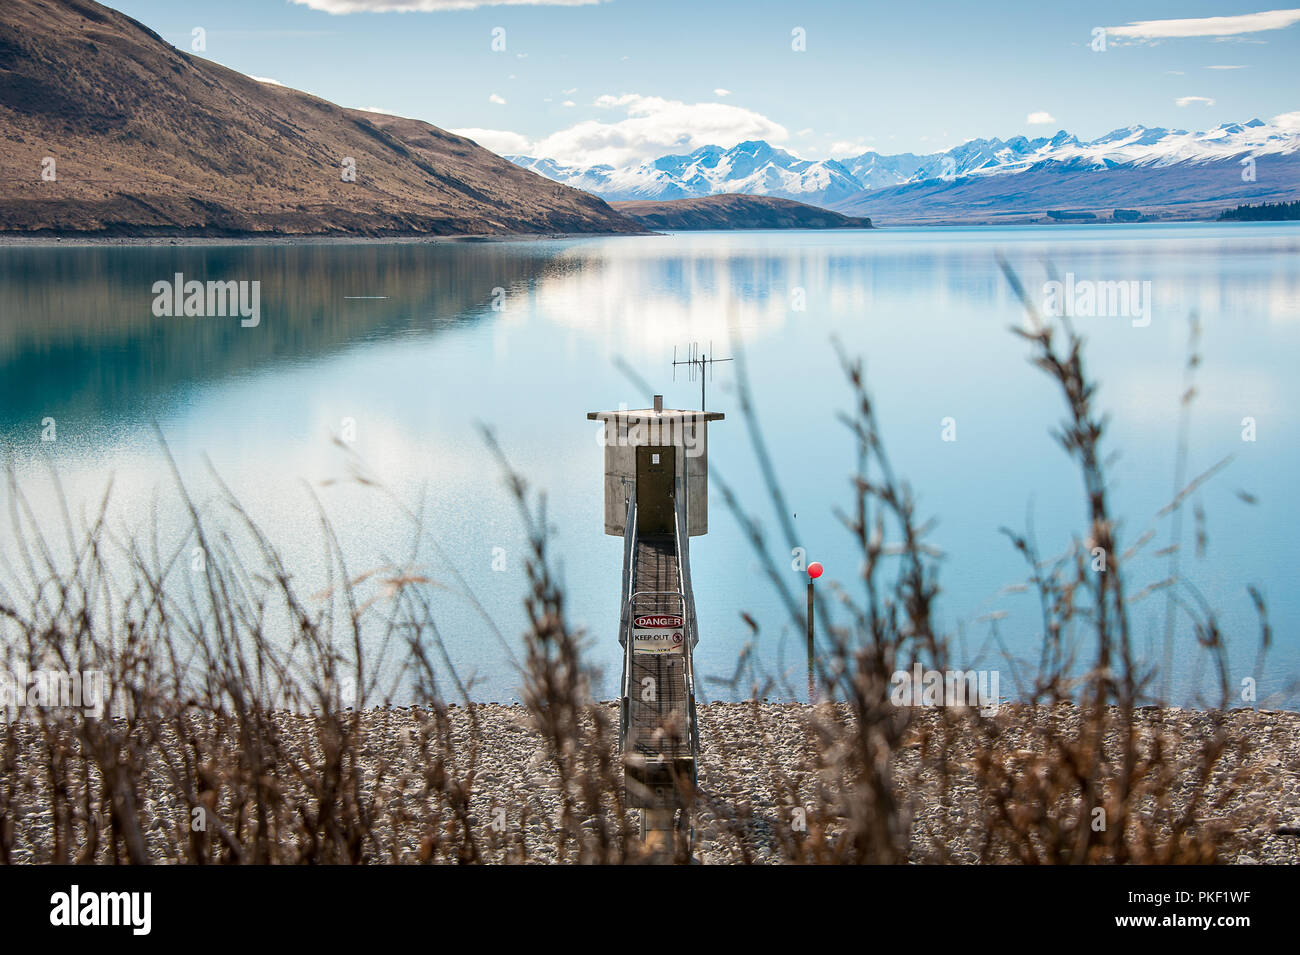 Lake Tekapo, New Zealand. Shoreline with small electrical substation, turquoise lake and view to snow covered Southern Alps in the background. Stock Photo